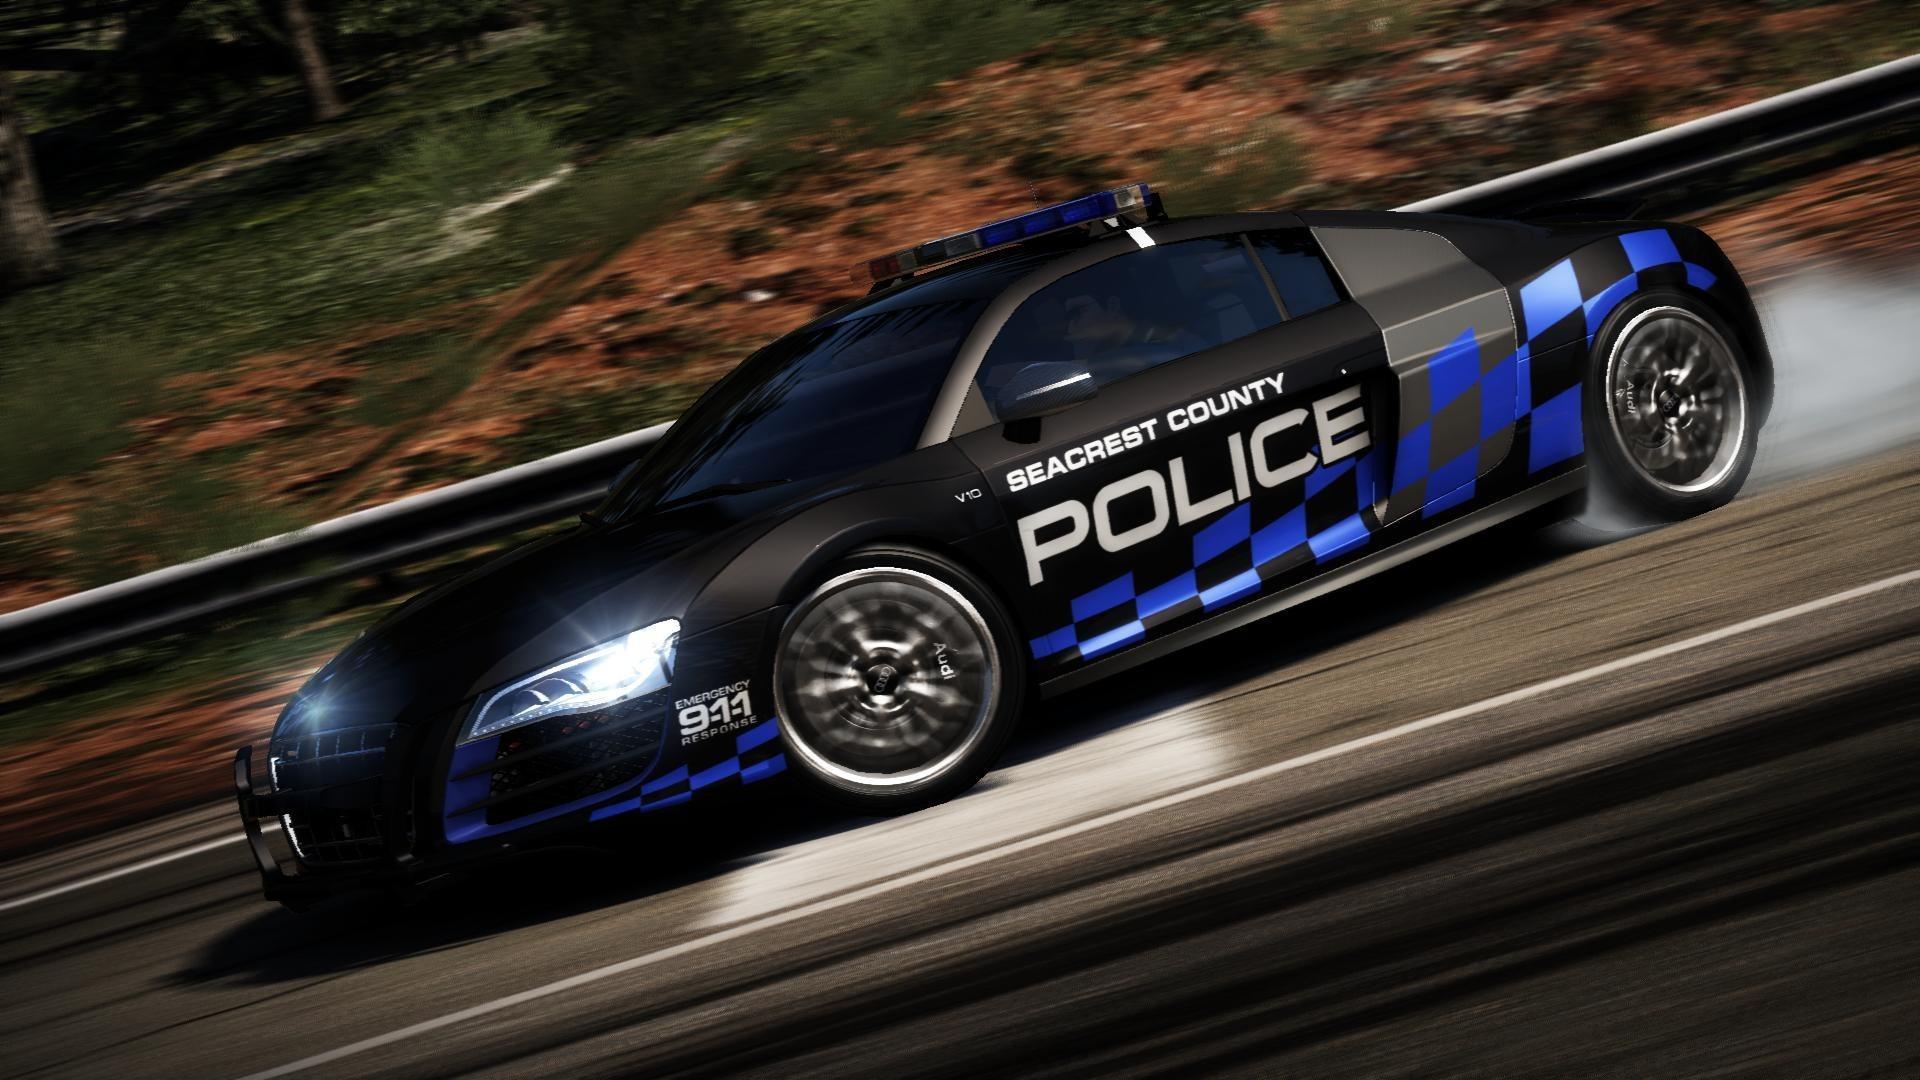 Top speed of police cars